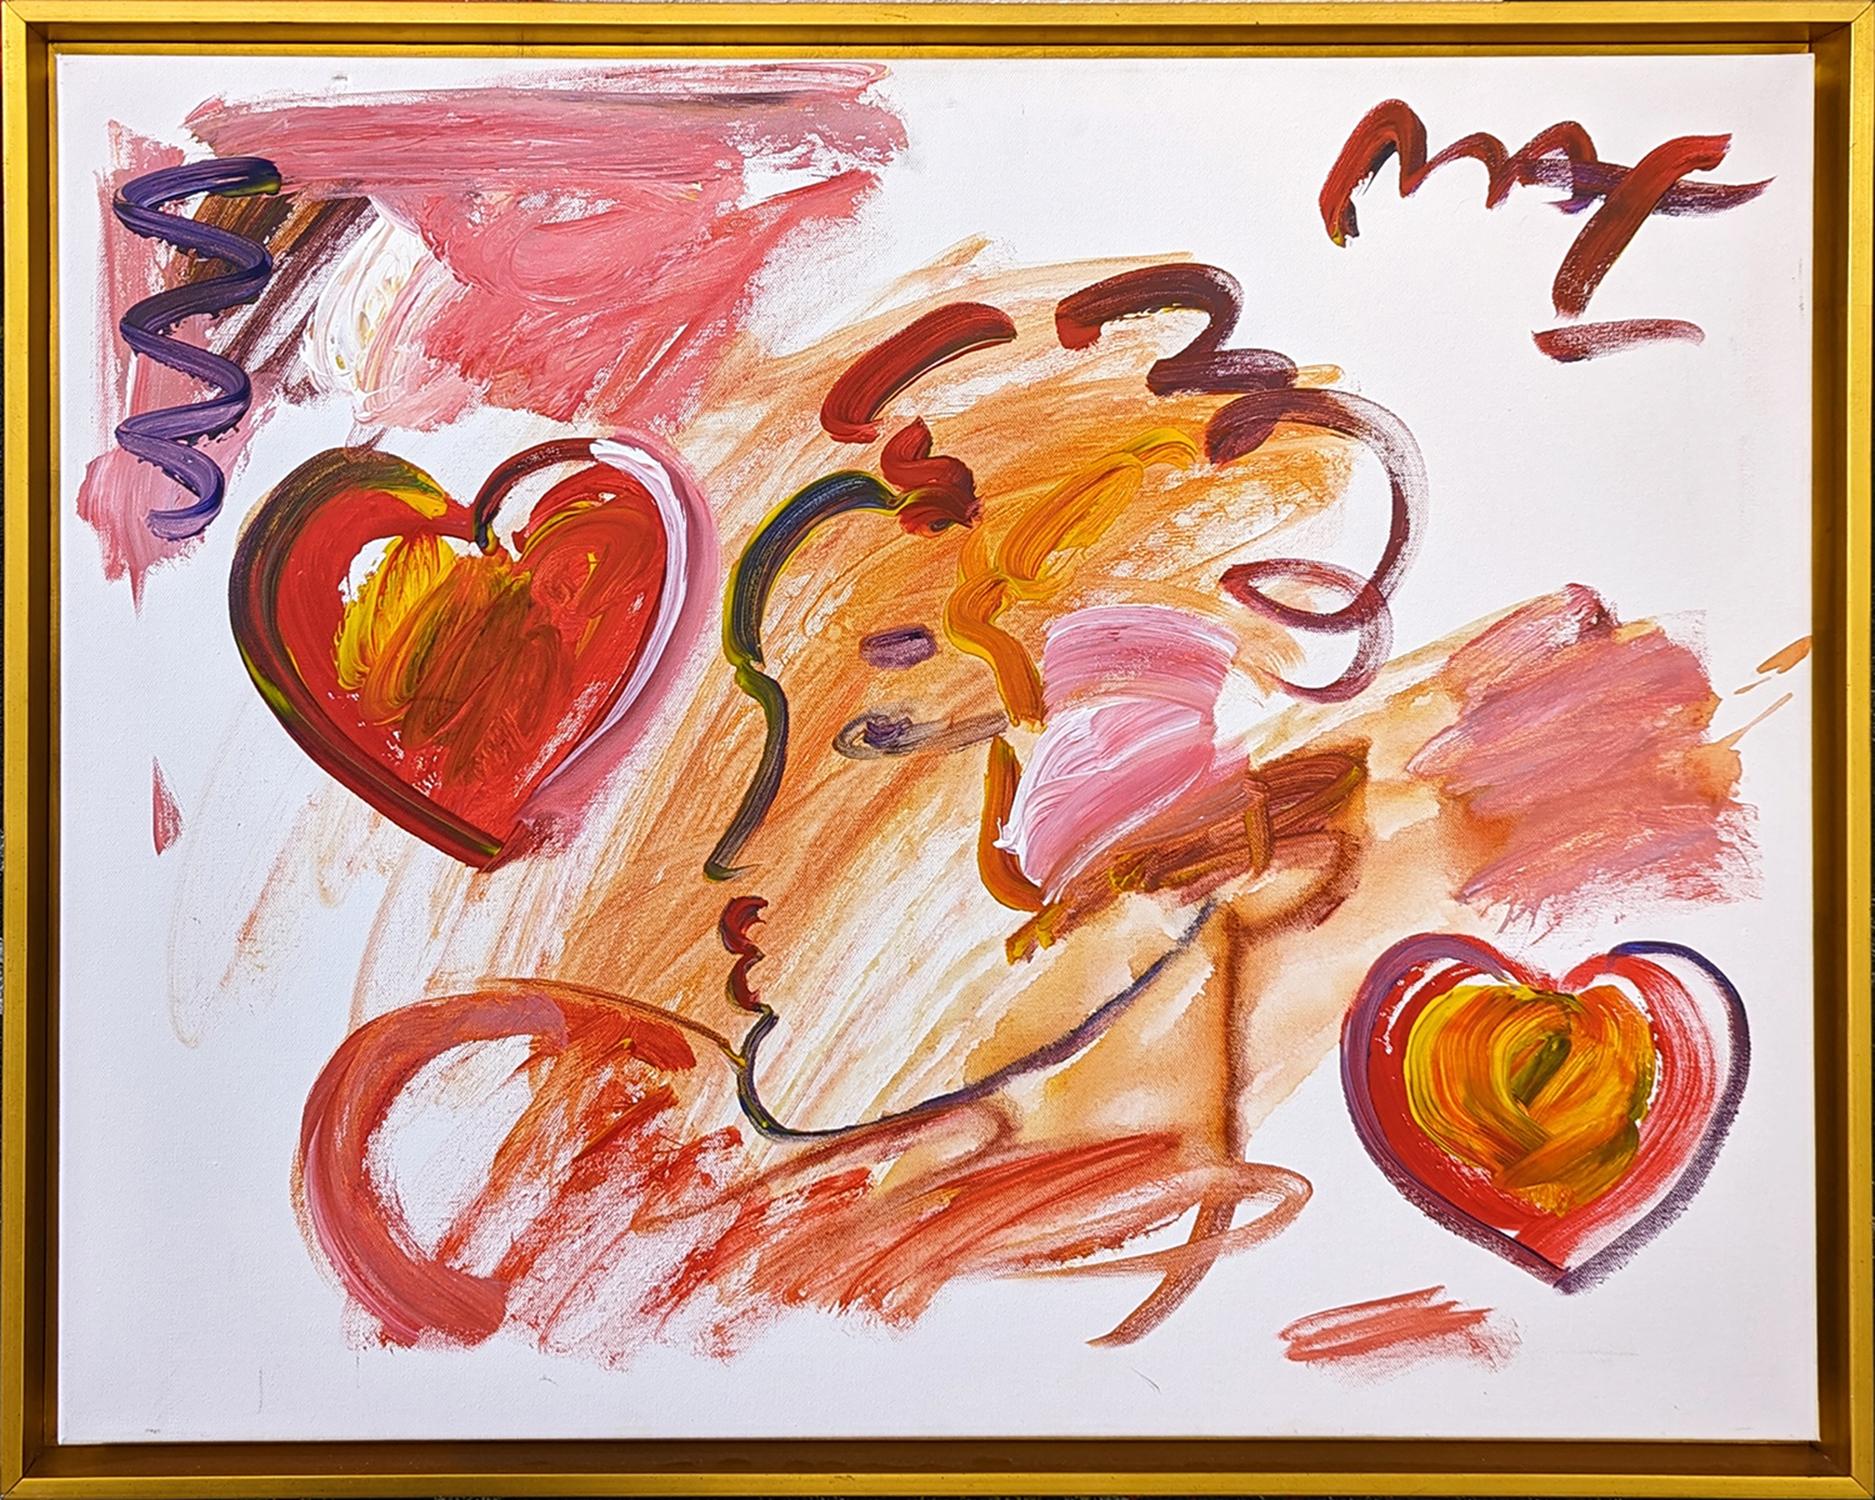 What is Peter Max best known for?